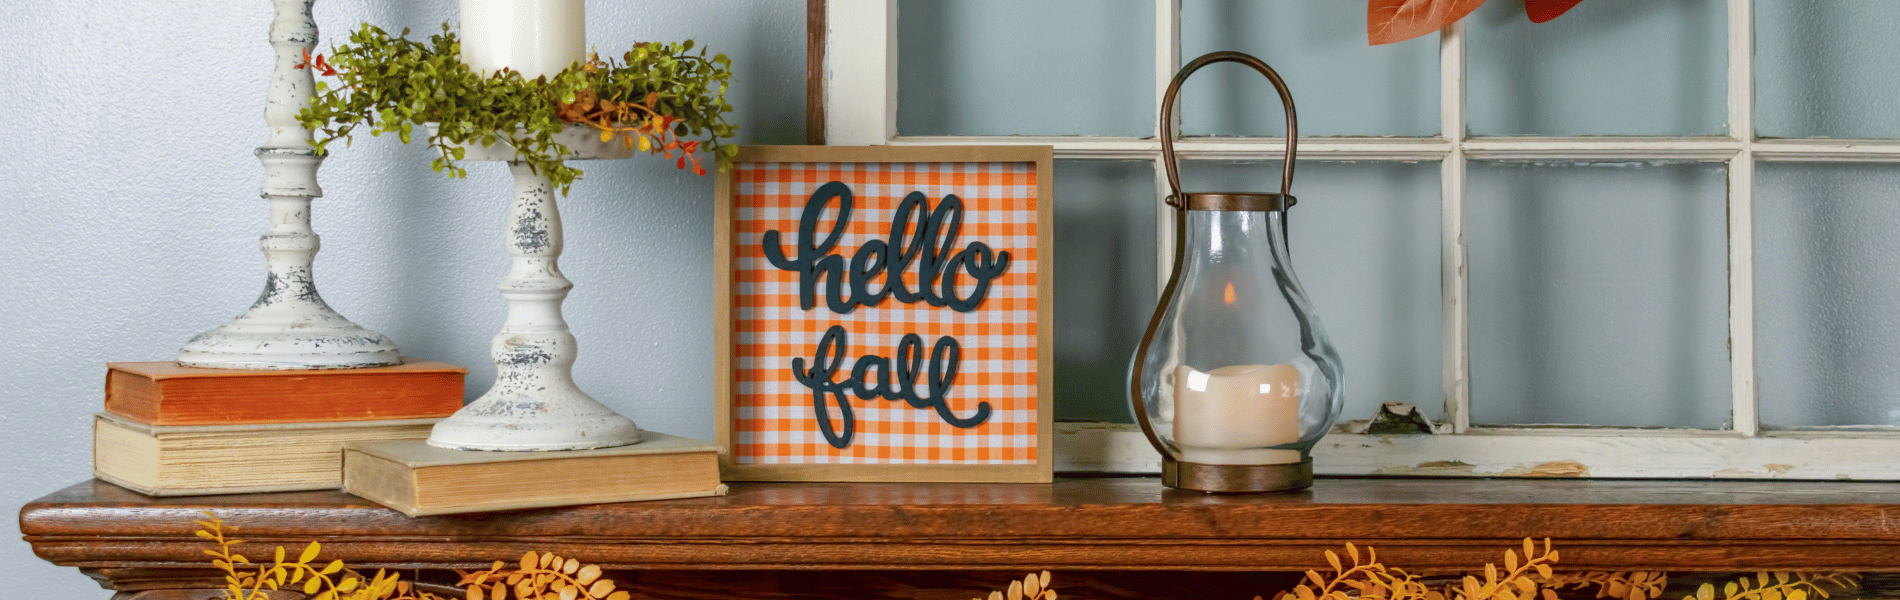 Looking for cottage home decor ideas for fall? We've got you covered!